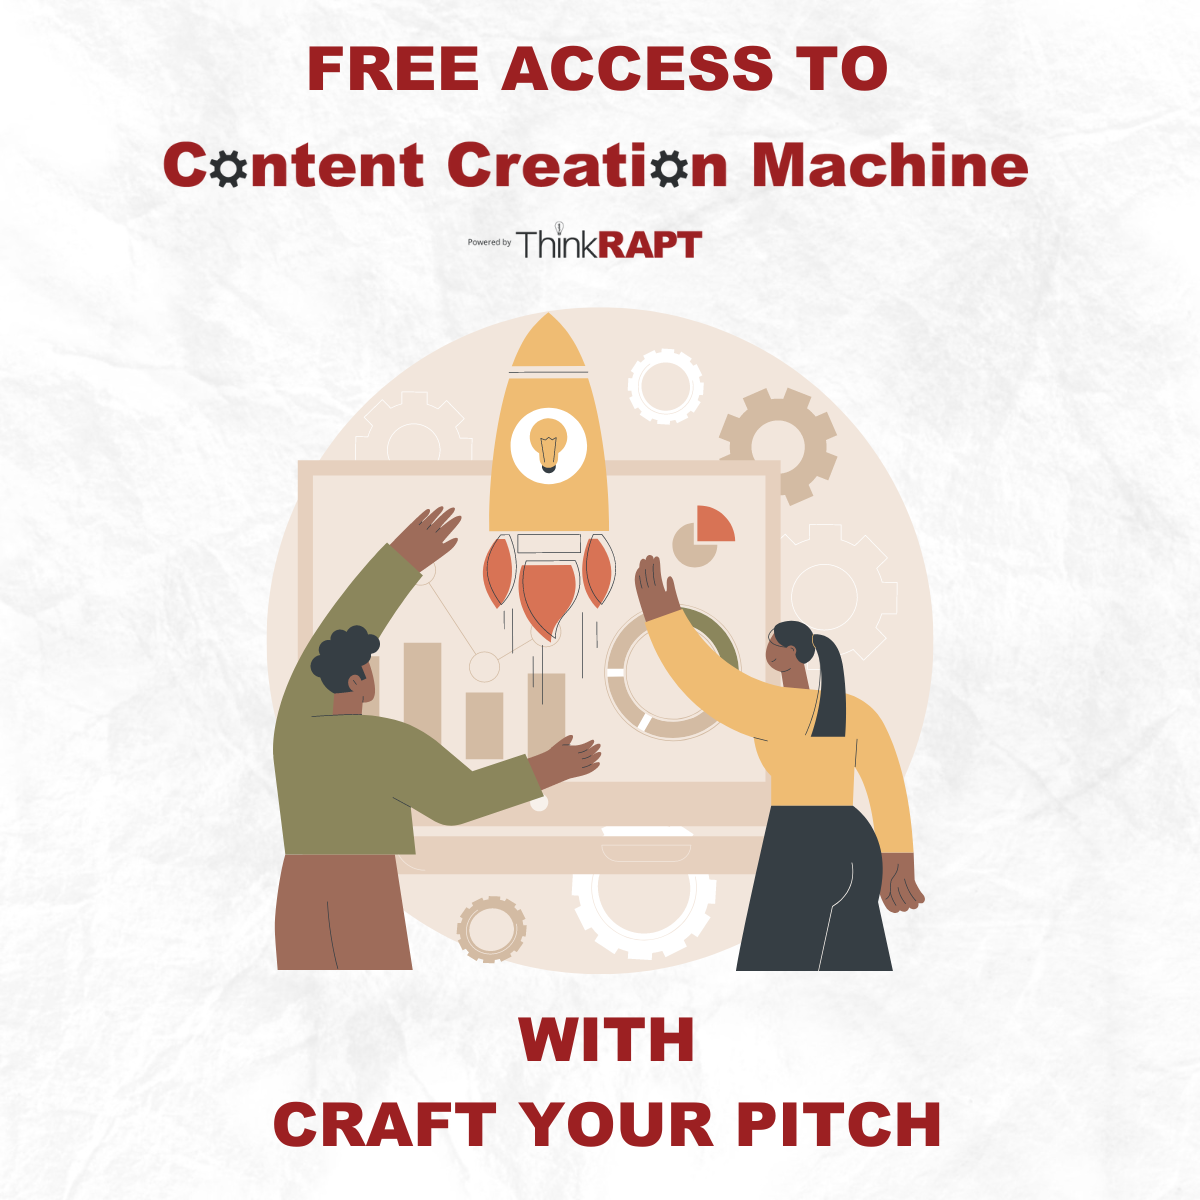 Free access to Content Creation Machine